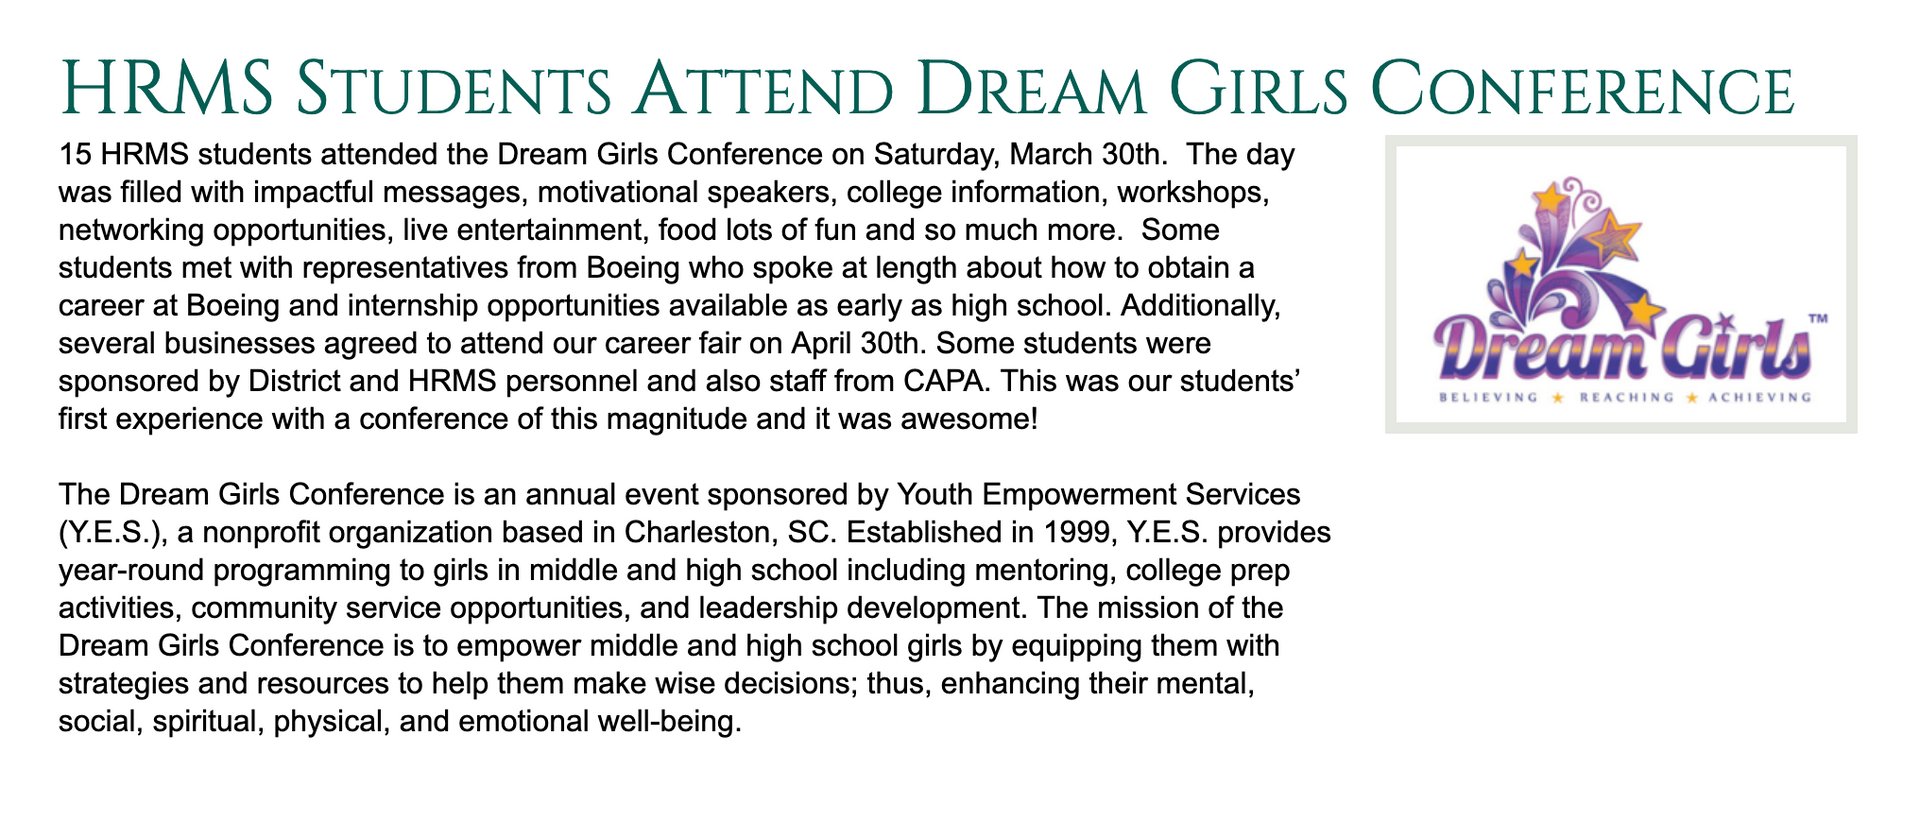 hrms students attend dream girls conference on saturday march 30th